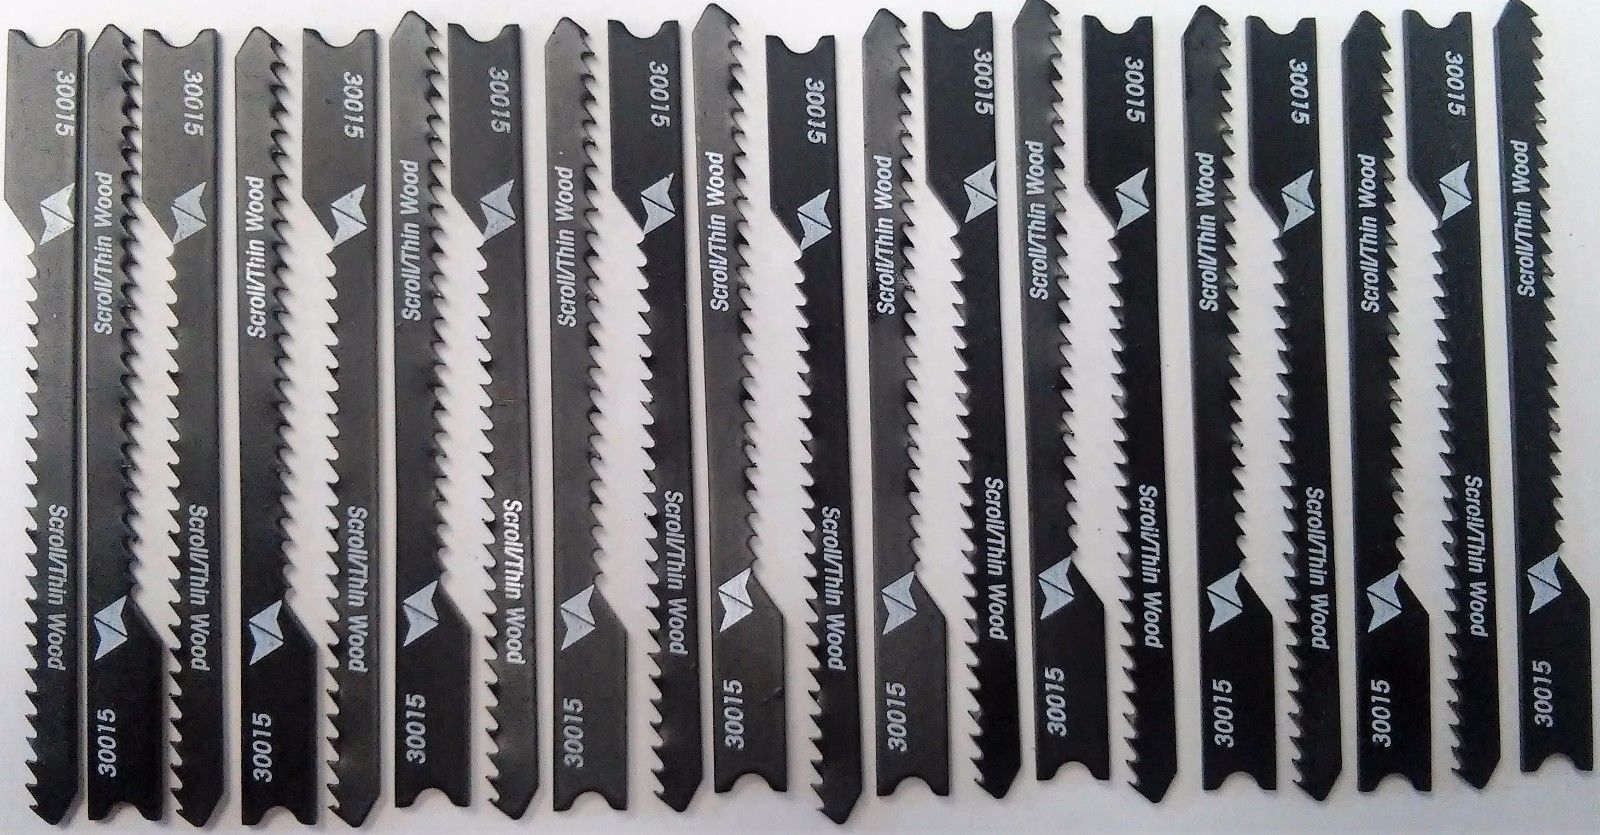 Vermont American 30015 Jig Saw Blade 2-3/4" 13TPI Scroll Wood 20pcs